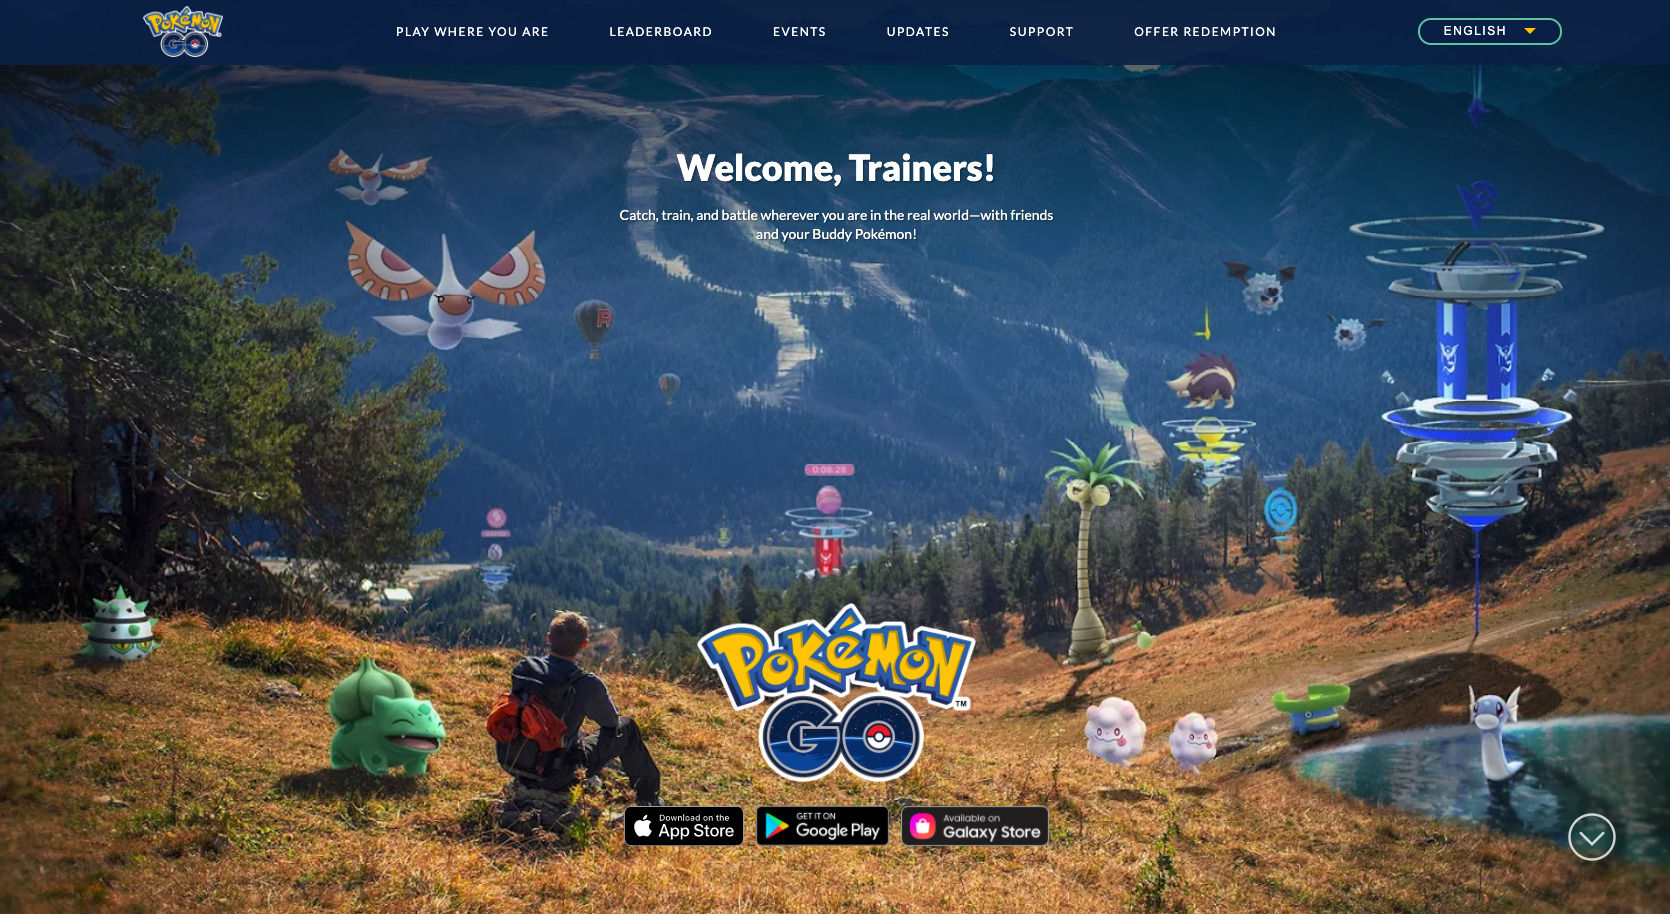 What is the Metaverse? Pokemon Go